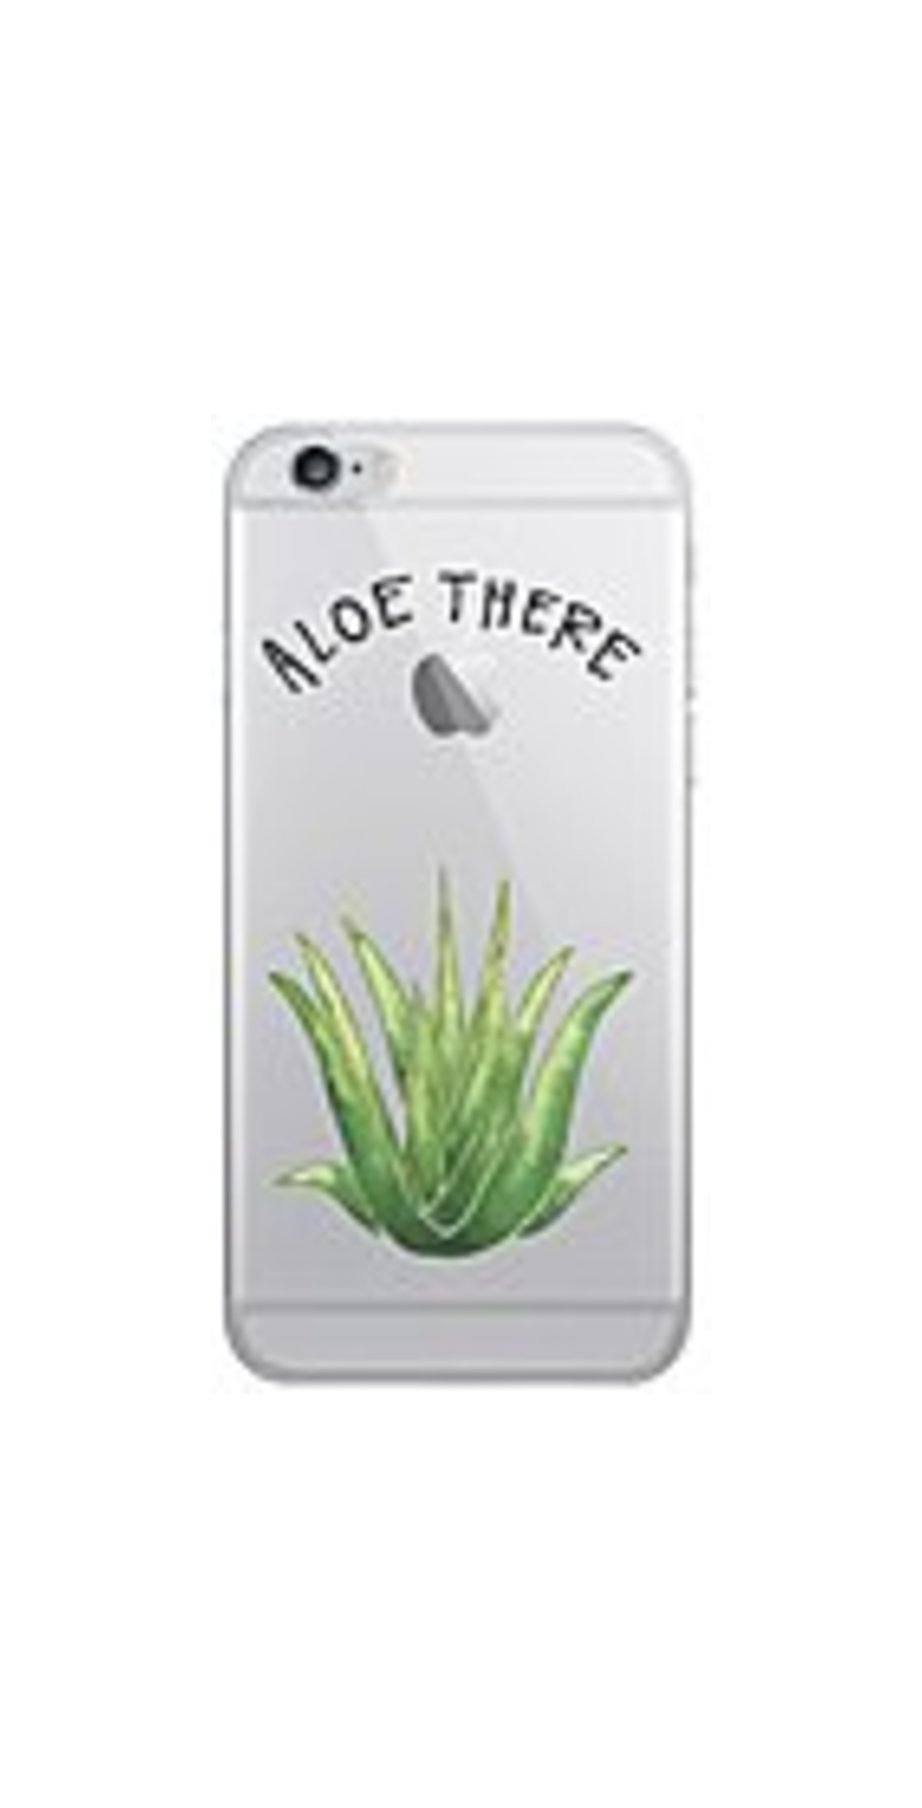 OTM iPhone 7/6/6s Plus Hybrid Clear Phone Case, Aloe There - For iPhone 7 Plus, iPhone 6 Plus, iPhone 6S Plus - Aloe There - Clear - Wear Resistant, T